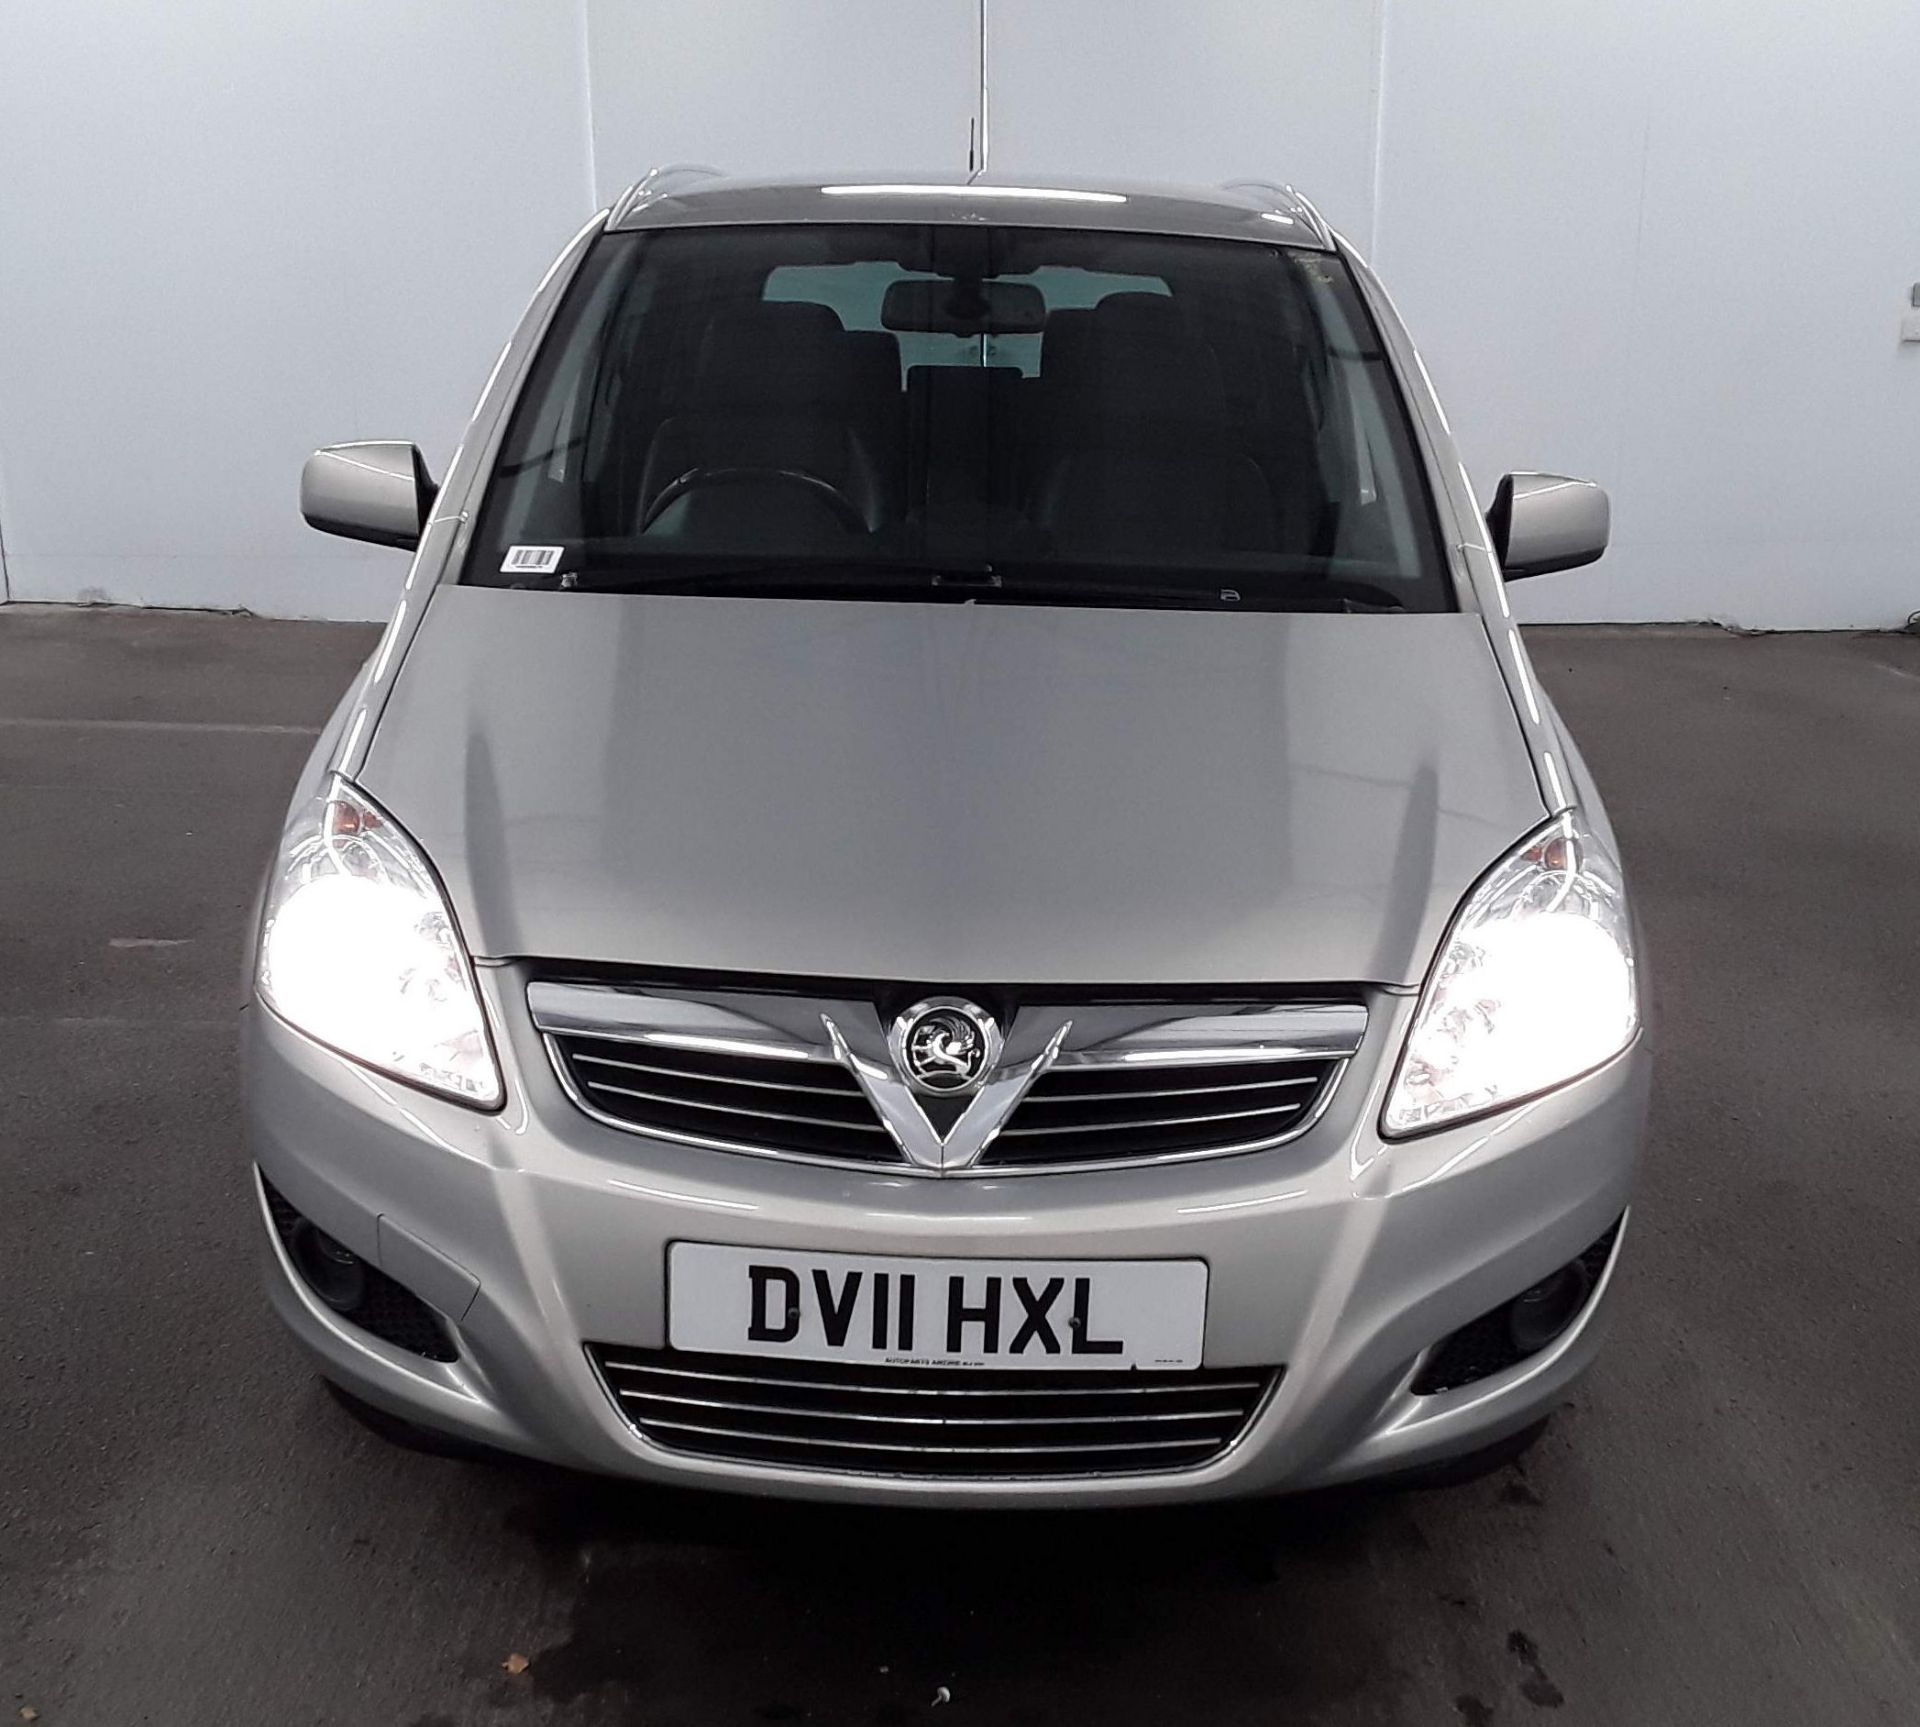 2011 Vauxhall Zafira 1.8 Design 5 Door MPV - CL505 - NO VAT ON THE HAMMER - Location: Corby - Image 10 of 12